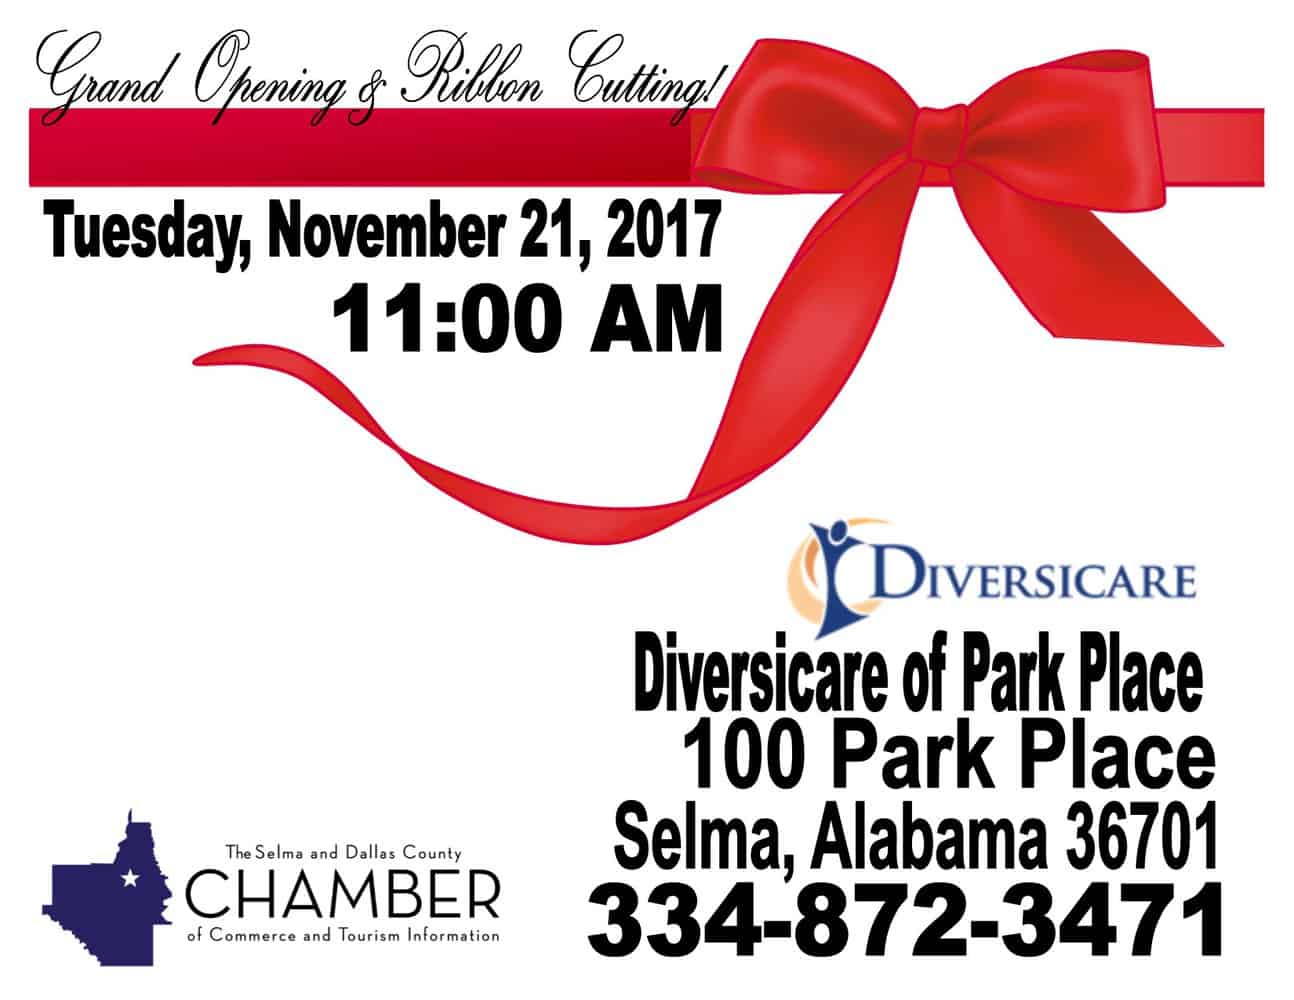 Diversicare of Park Place Grand Opening Ribbon Cutting